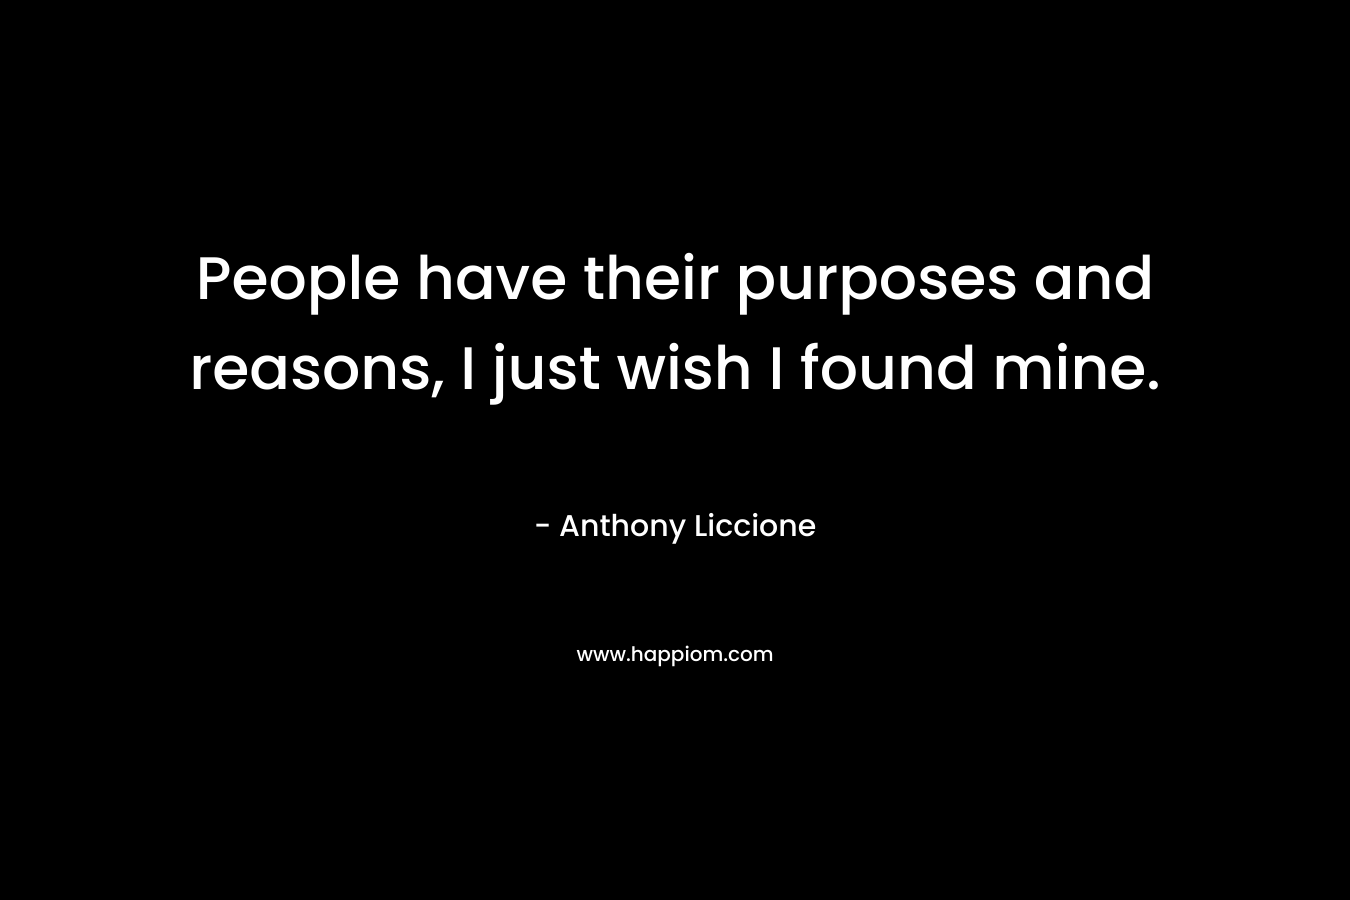 People have their purposes and reasons, I just wish I found mine.